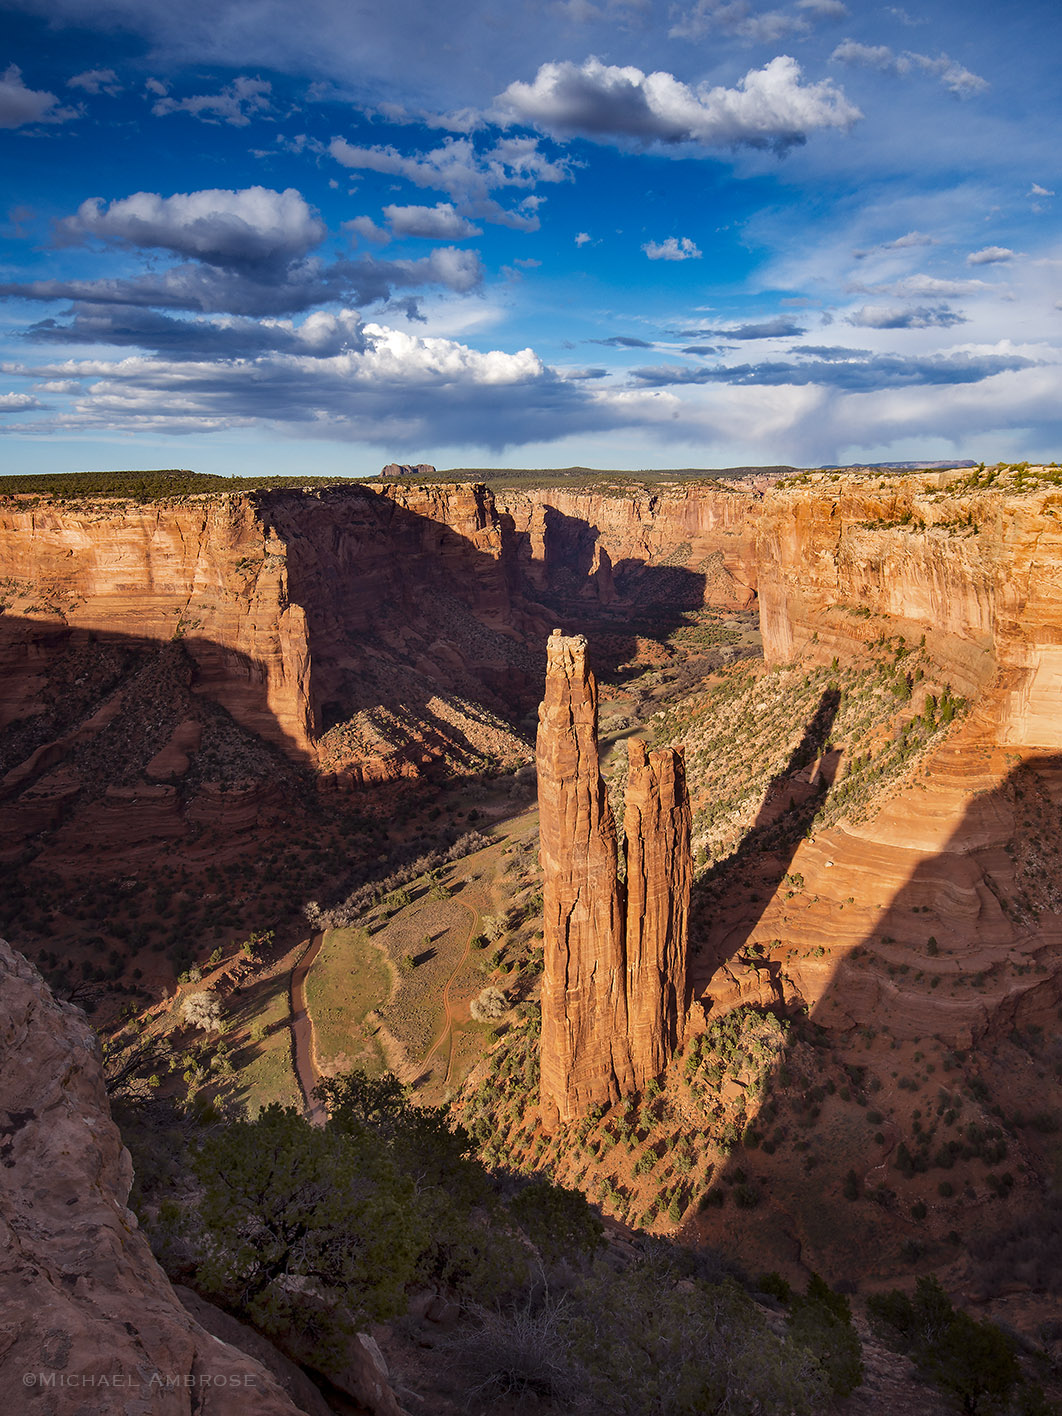 Spider Rock spire is a prominent feature in Canyon de Chelly National Monument, on Navajo land in Arizona.